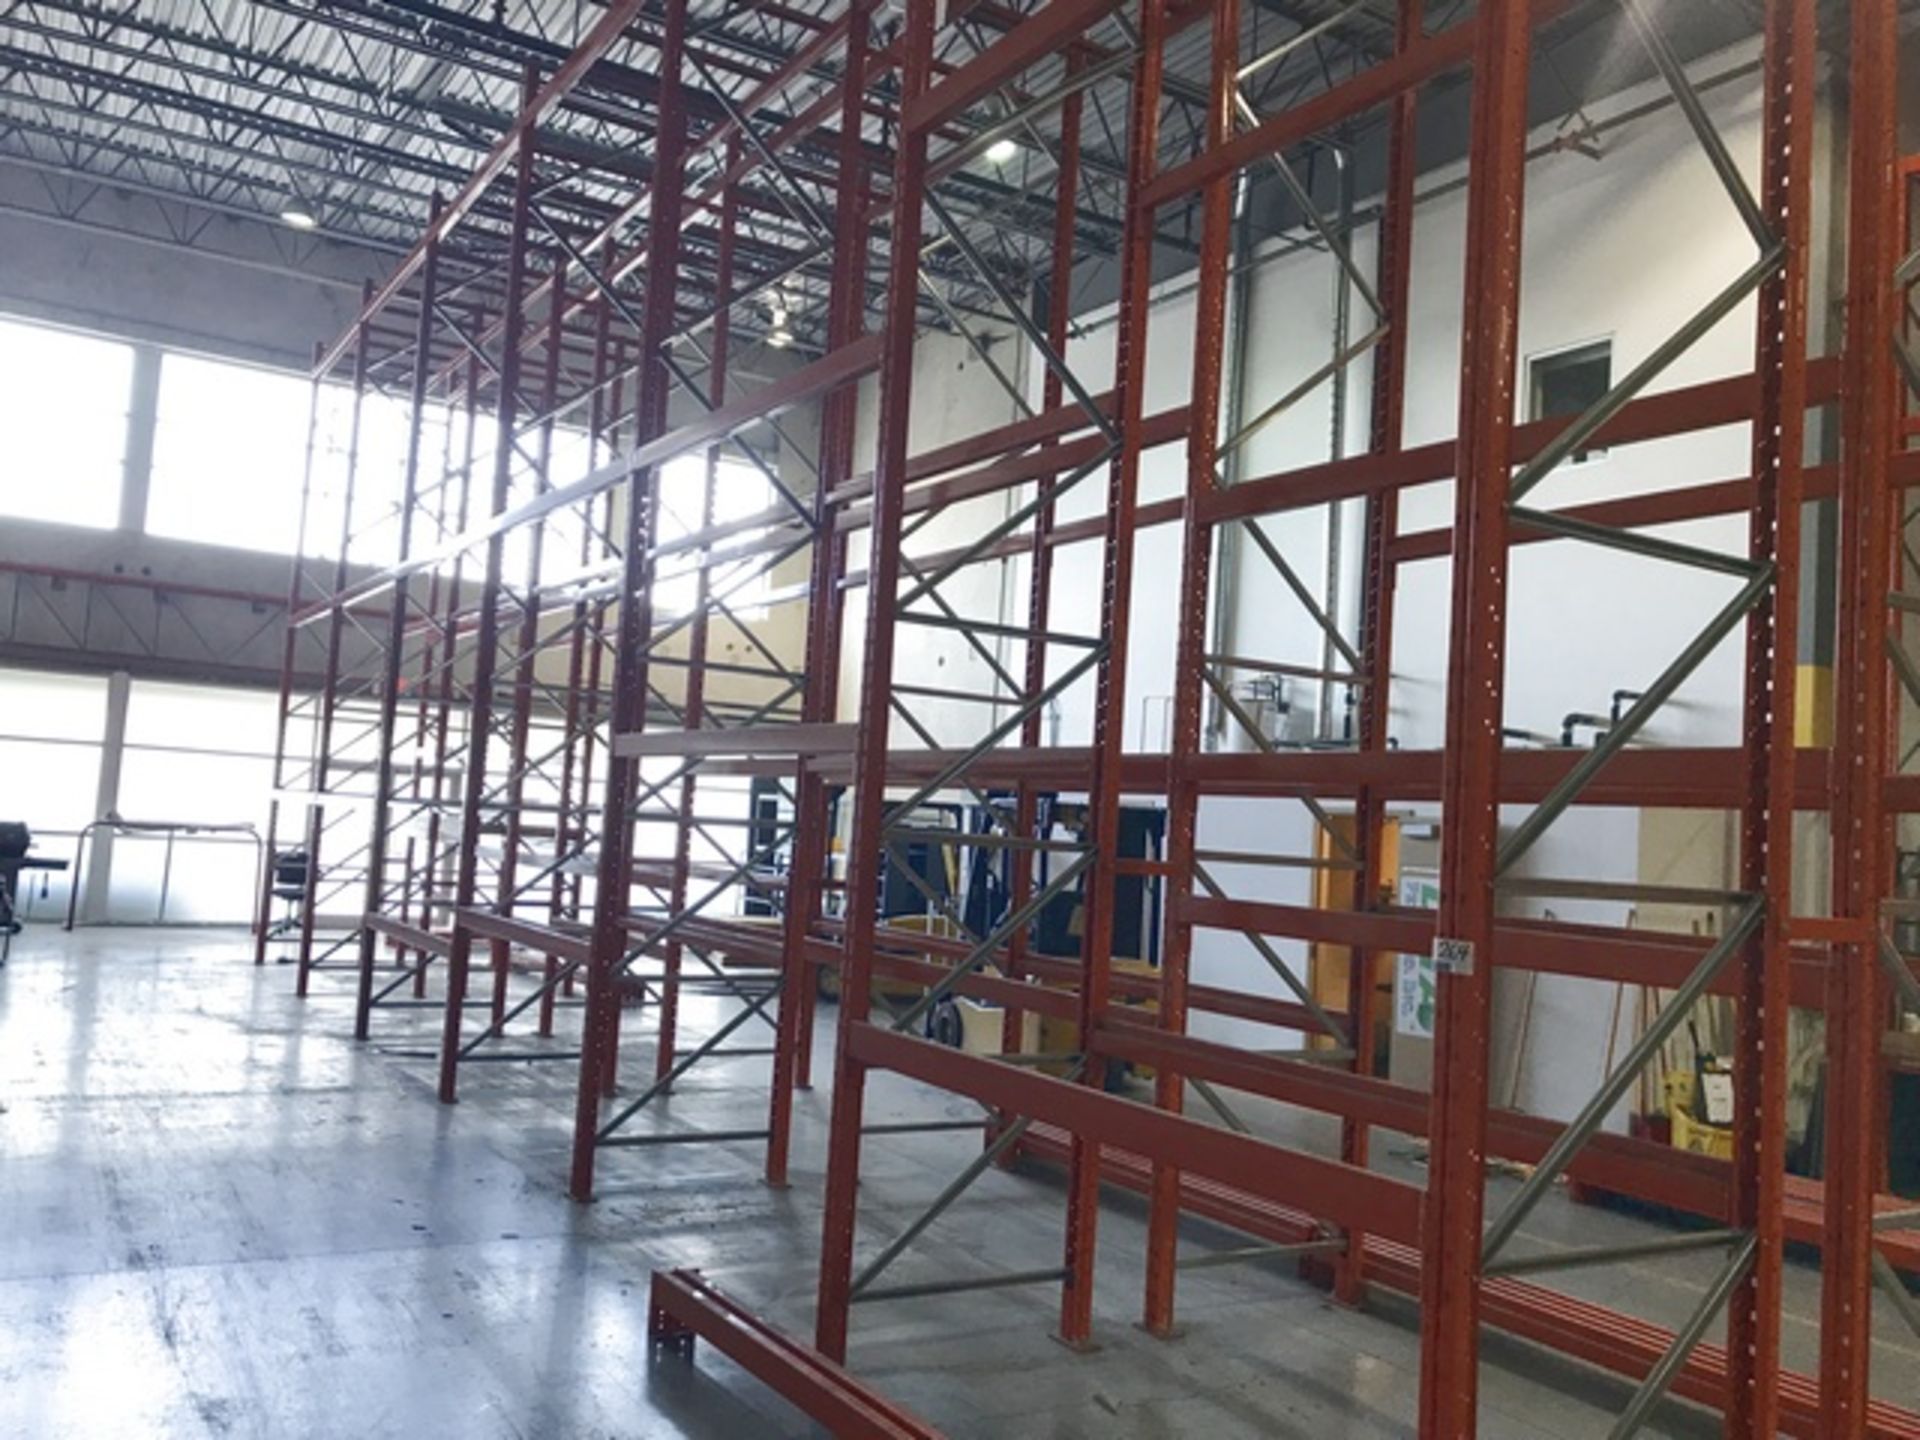 PALLET RACKING 21' HIGH, 42" DEEP WITH 8' BEAMS, 3 LEVELS X 6 BAYS